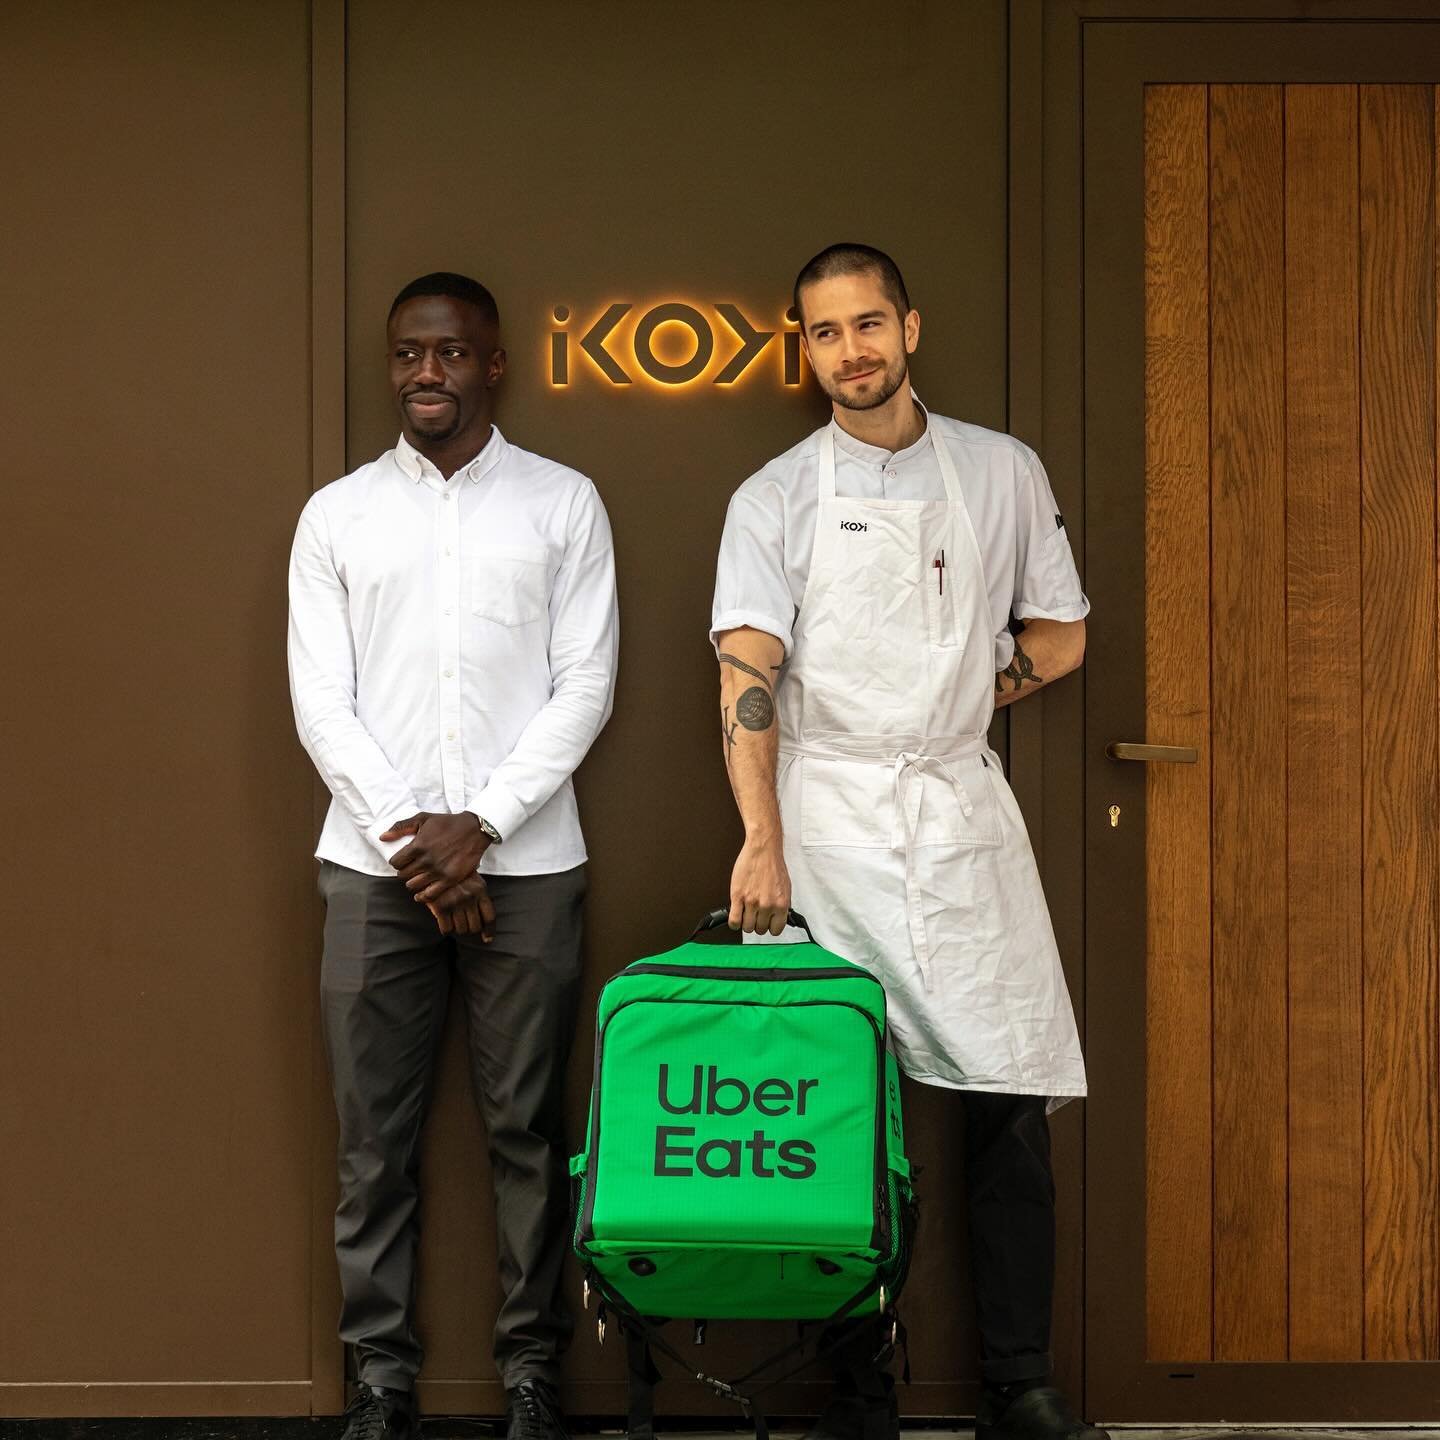 On the 10th and 11th of May @ikoyi_london and @jeremychanikoyi cuisine will be available to have delivered to your door on @ubereats_uk . 

The five-course exclusive menu will be available for &pound;60 per person, with an extra drinks pairing option